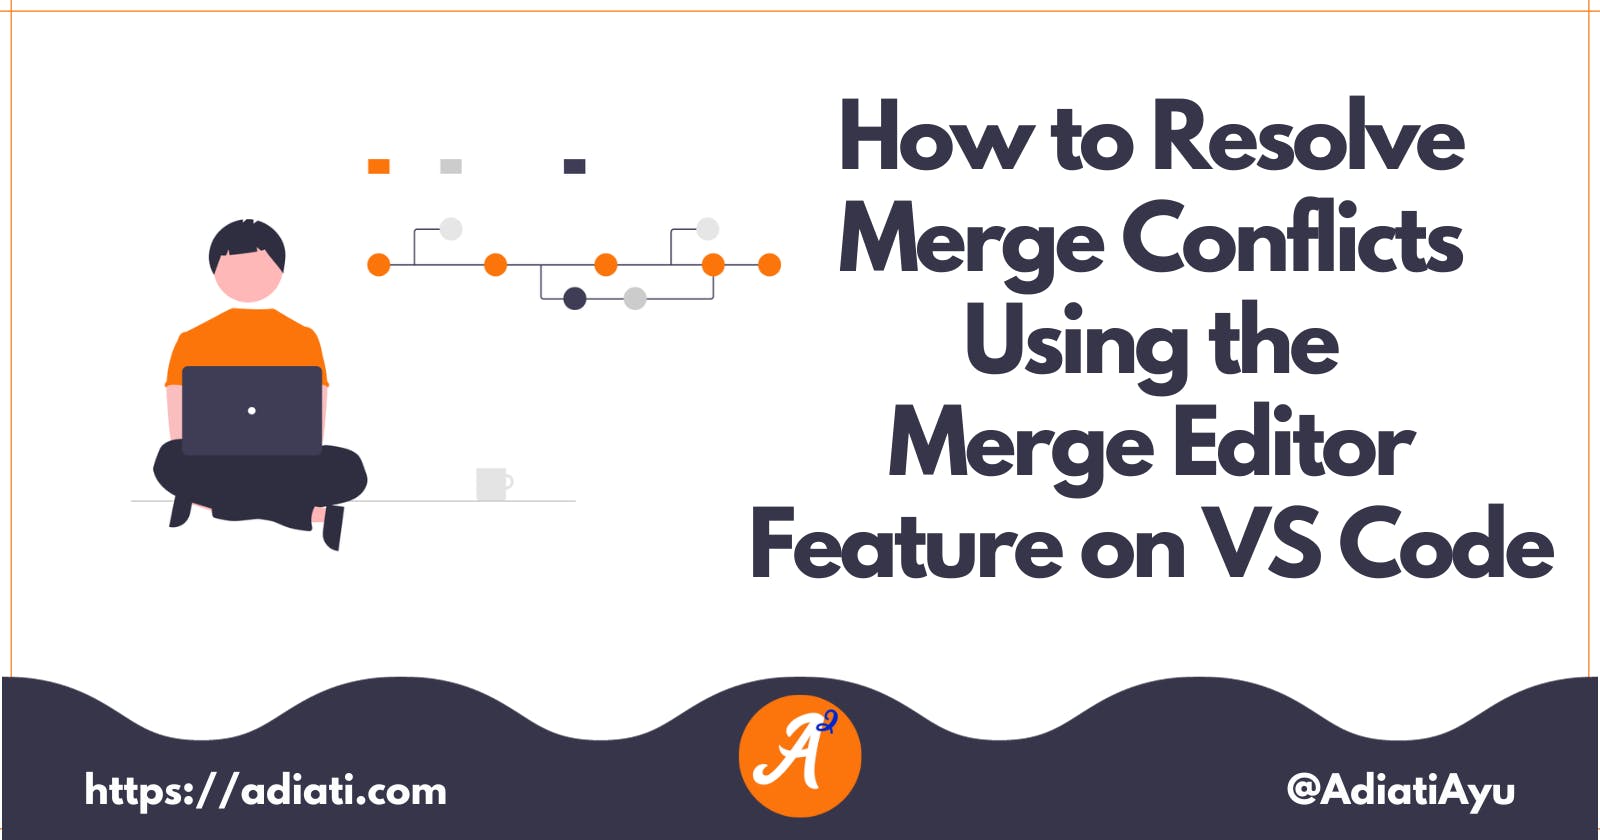 How to Resolve Merge Conflicts Using the Merge Editor Feature on VS Code